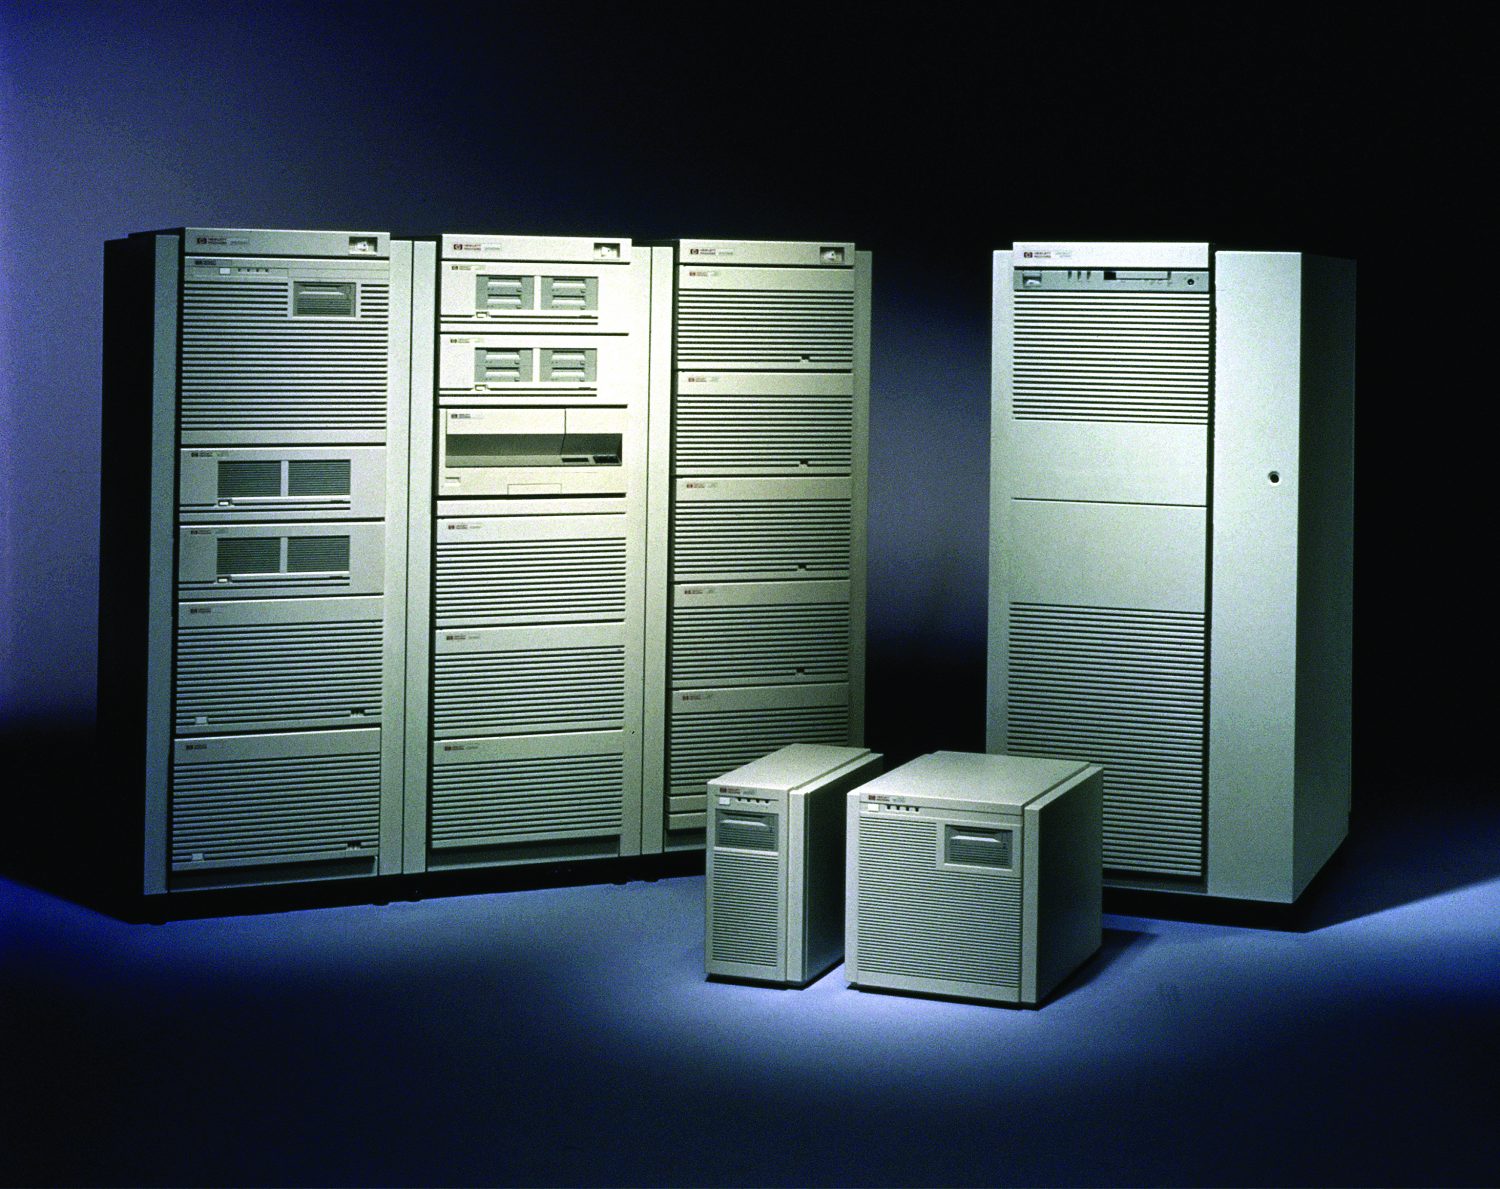 Examples of data center systems adapted from HP's 3000 and 9000 product lines.